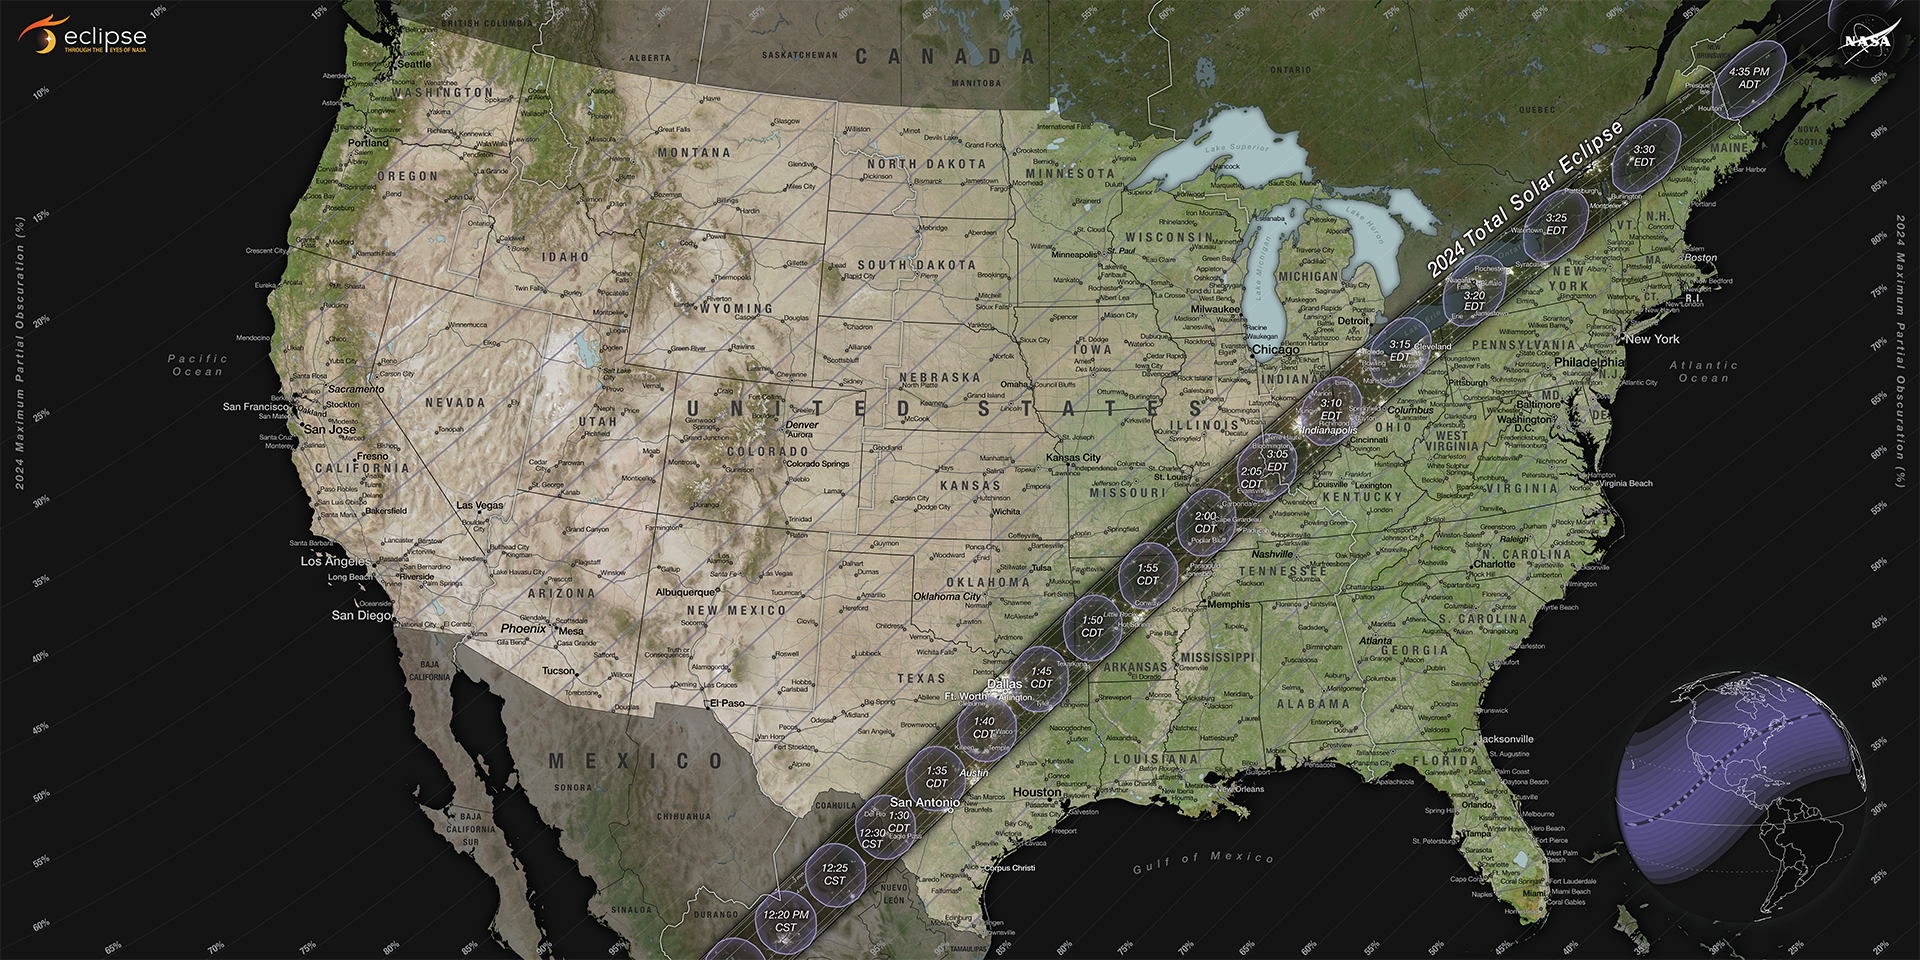 The path of totality and partial contours crossing the US for the 2024 total solar eclipse occurring on April 8, 2024. CREDIT: NASA.